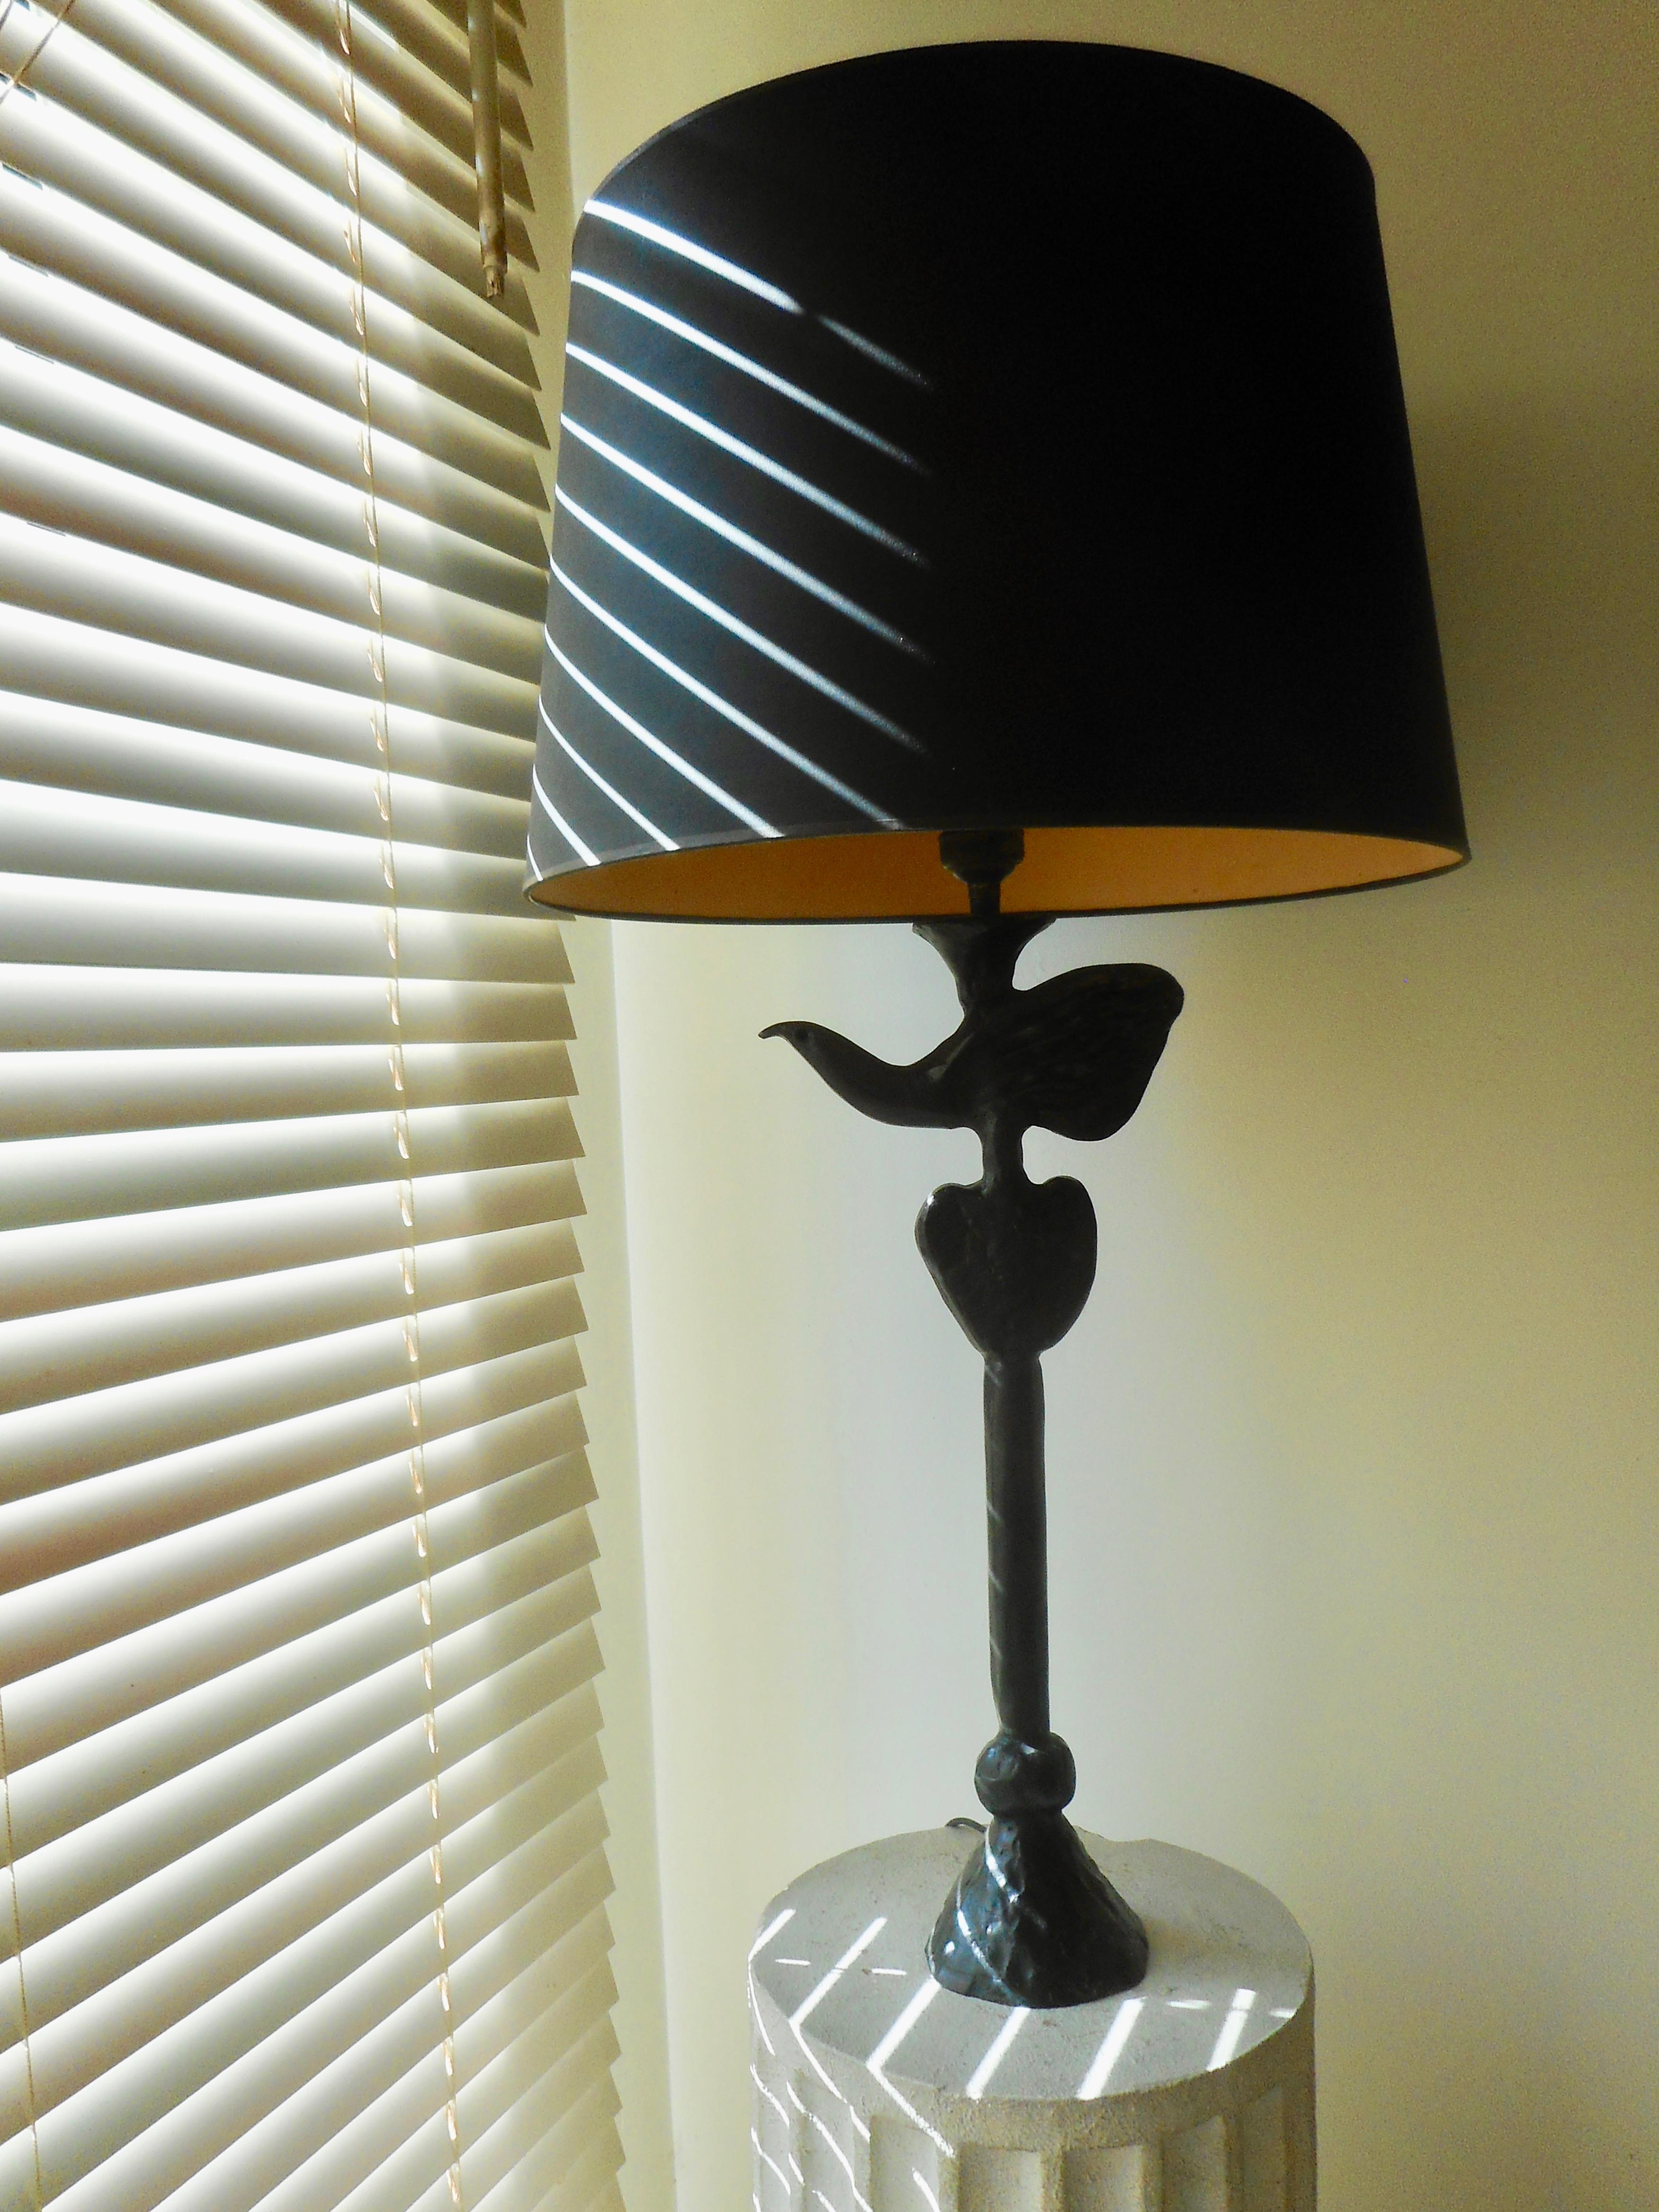 Usually gilded, this lamp is blackened bronze rarer version by Casanove for Fondica.
One light, coming with a black cardboard lampshade.,
circa 1990.